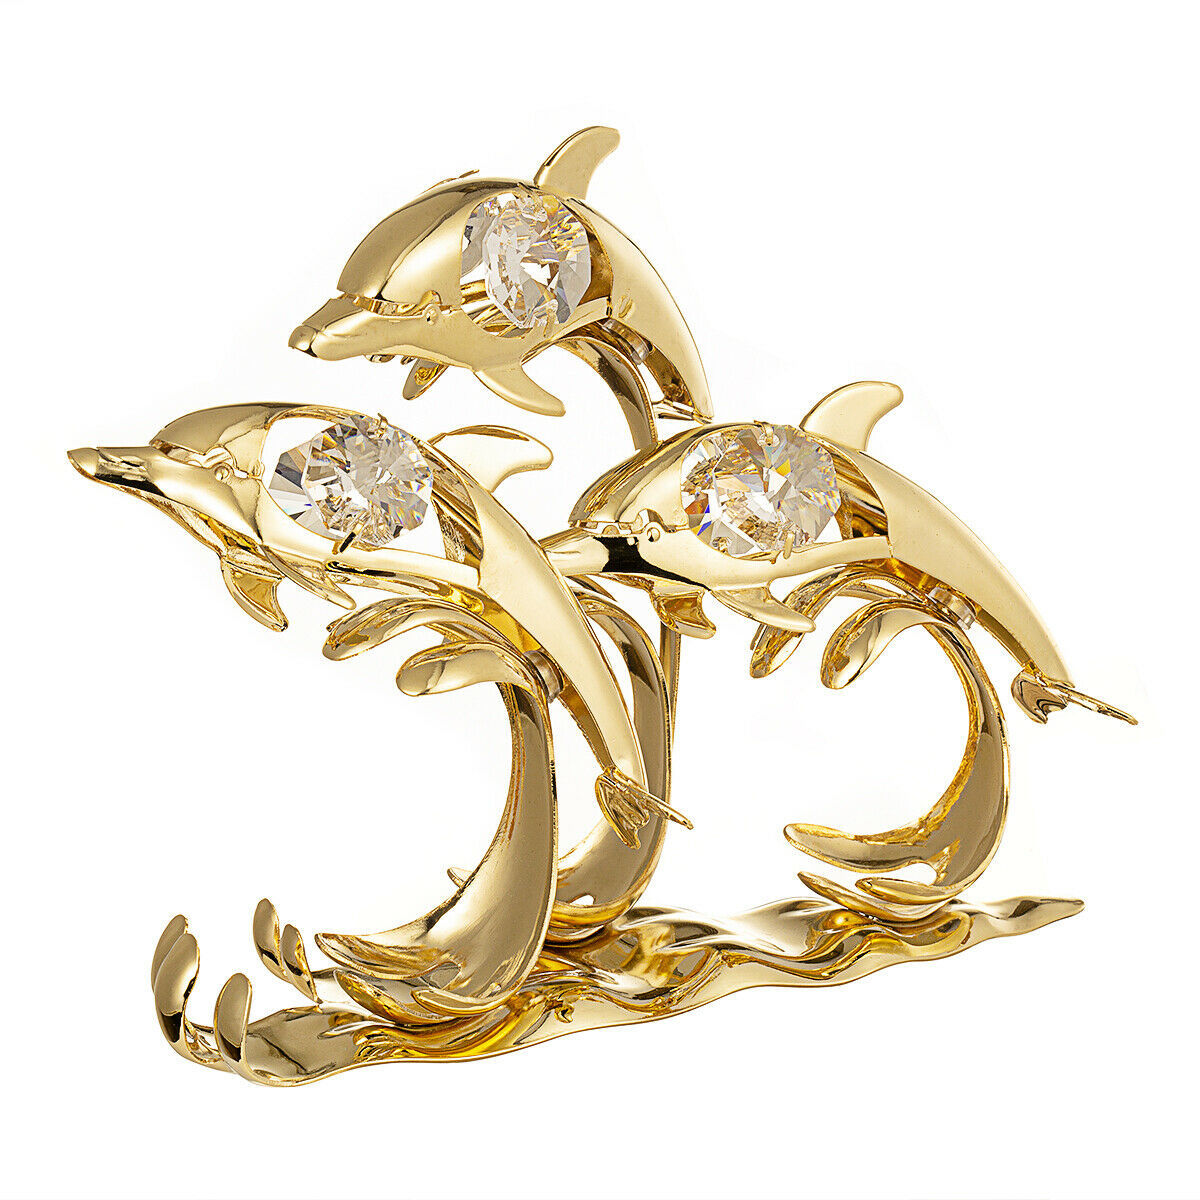 Primary image for CRYSTAL ELEMENT STUDDED 3 DOLPHINS ON WAVES FIGURINE 24K GOLD PLATED #CRT15